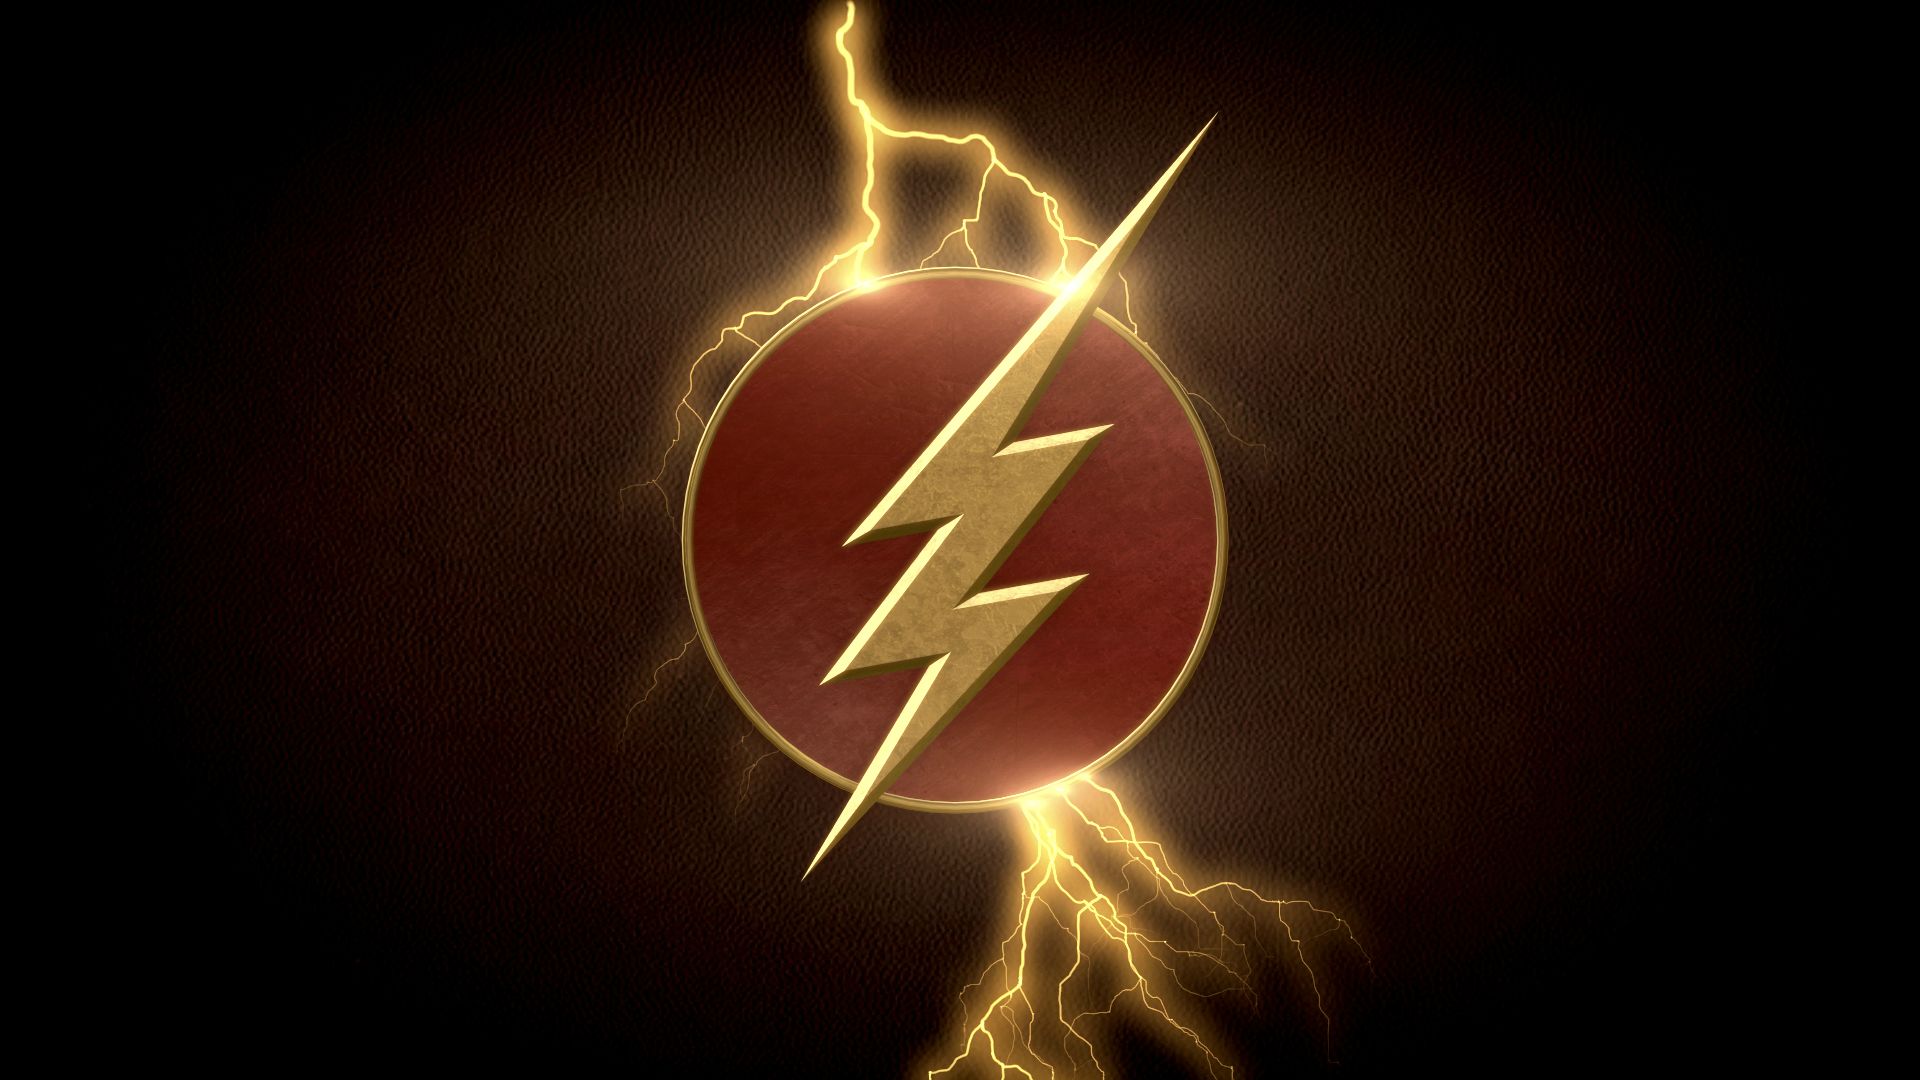 User Bigrockdj Posted An Awesome Flash Logo Wallpaper To R Dcics